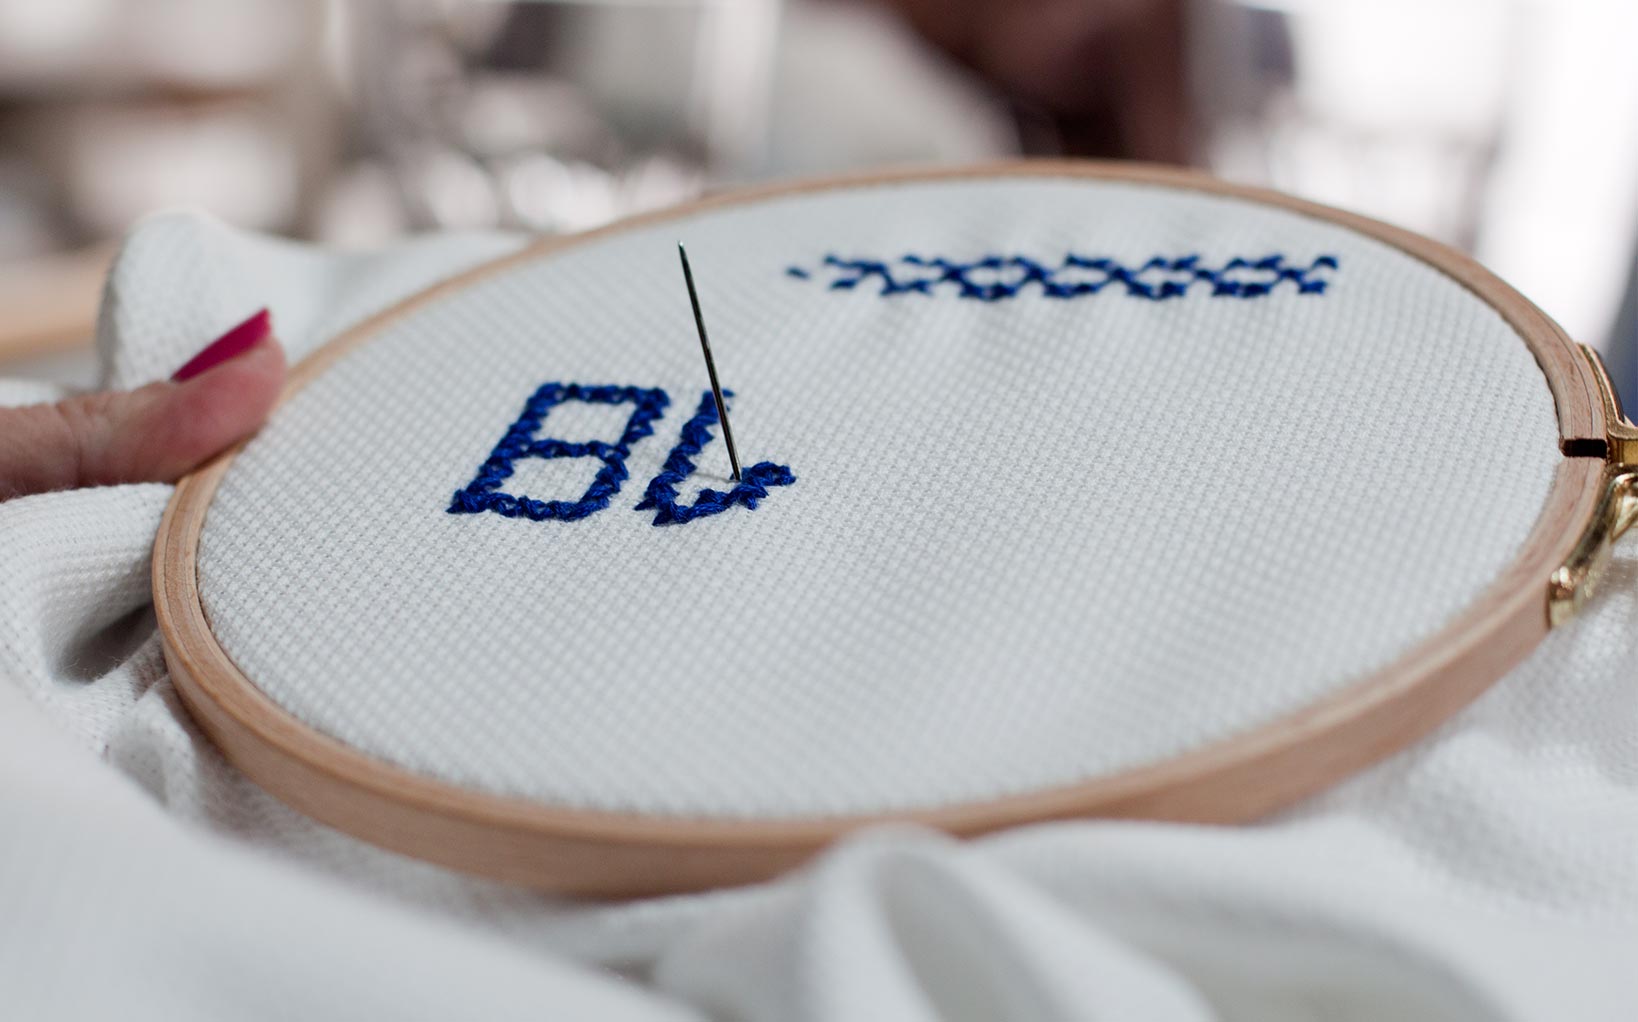 Belgrade Waterfront Embroidery Typography - p